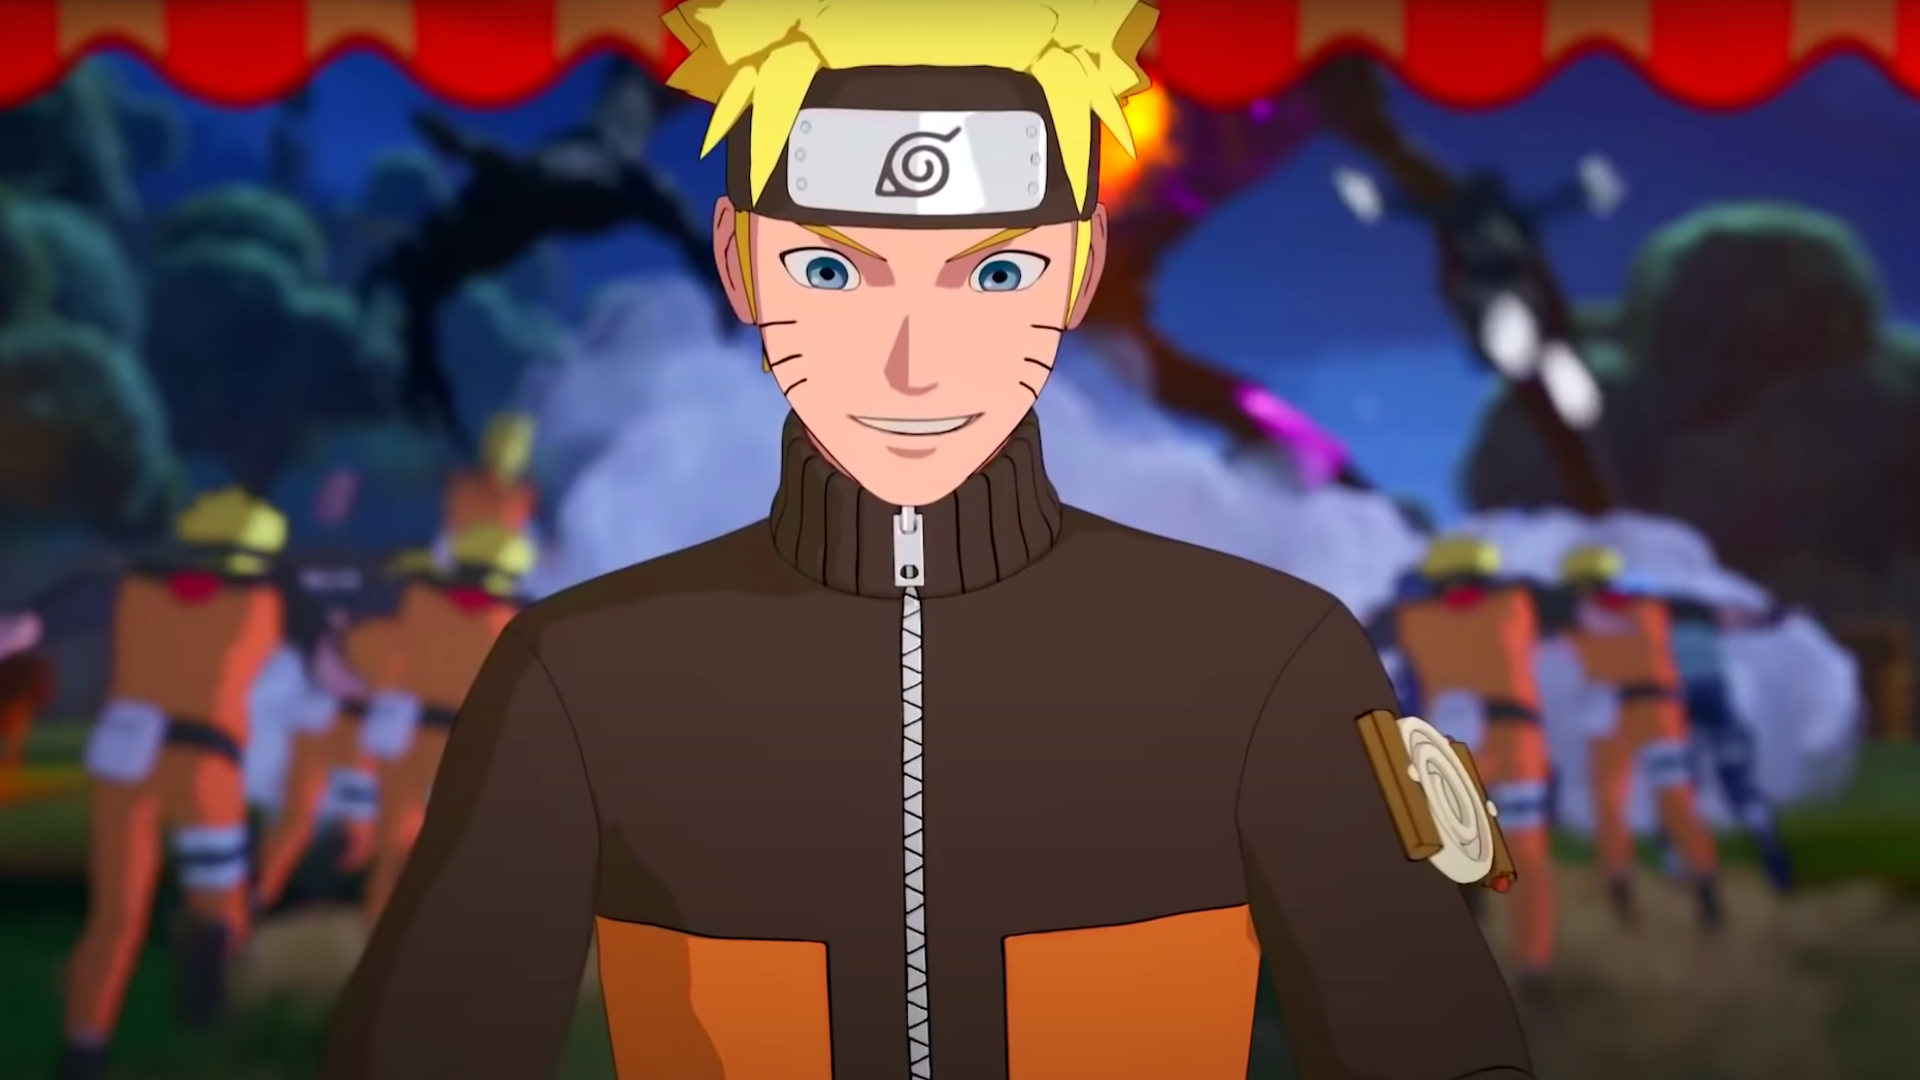 Will there be more Naruto skins arriving in Fortnite Chapter 3